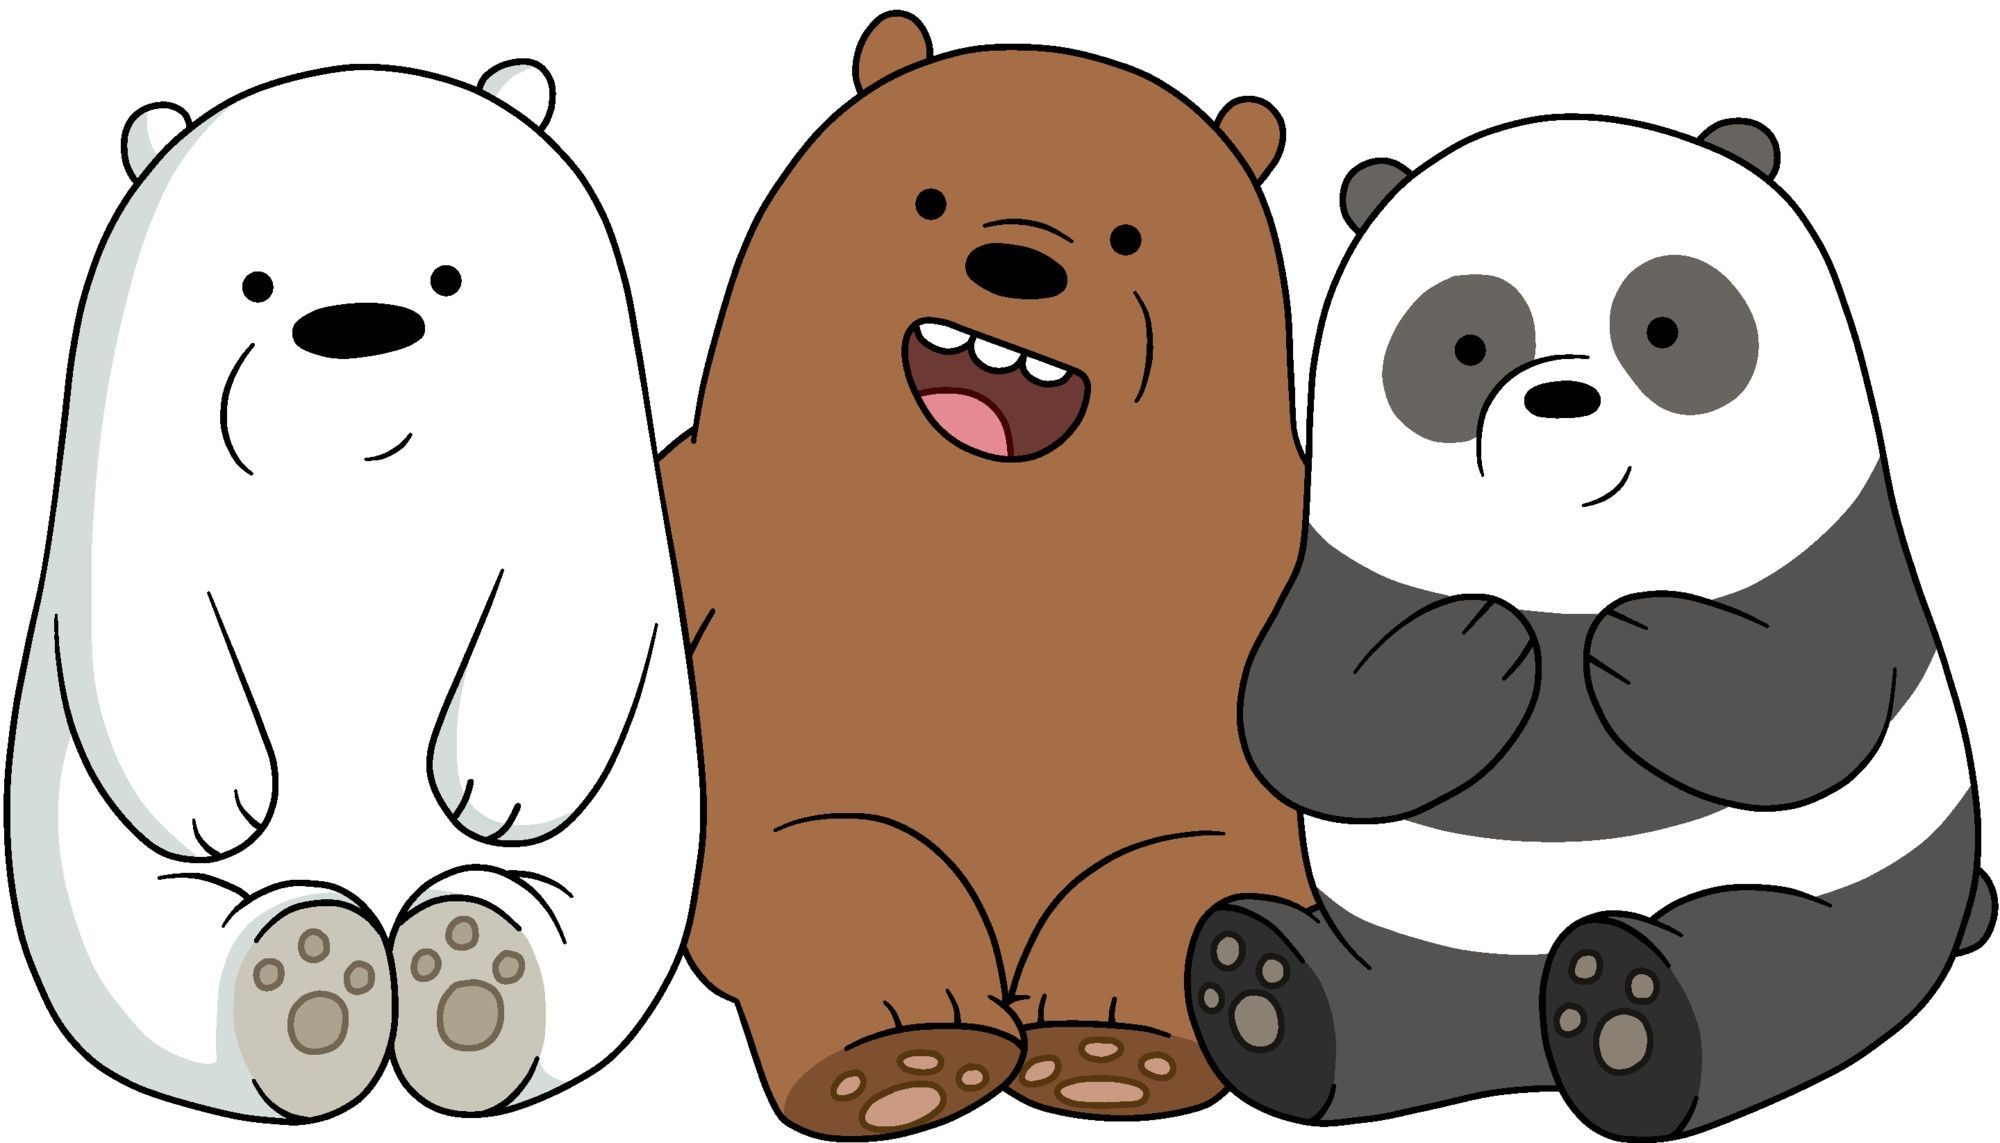 We Bare Bears Wallpaper 94 Image with The Most Awesome We Bare